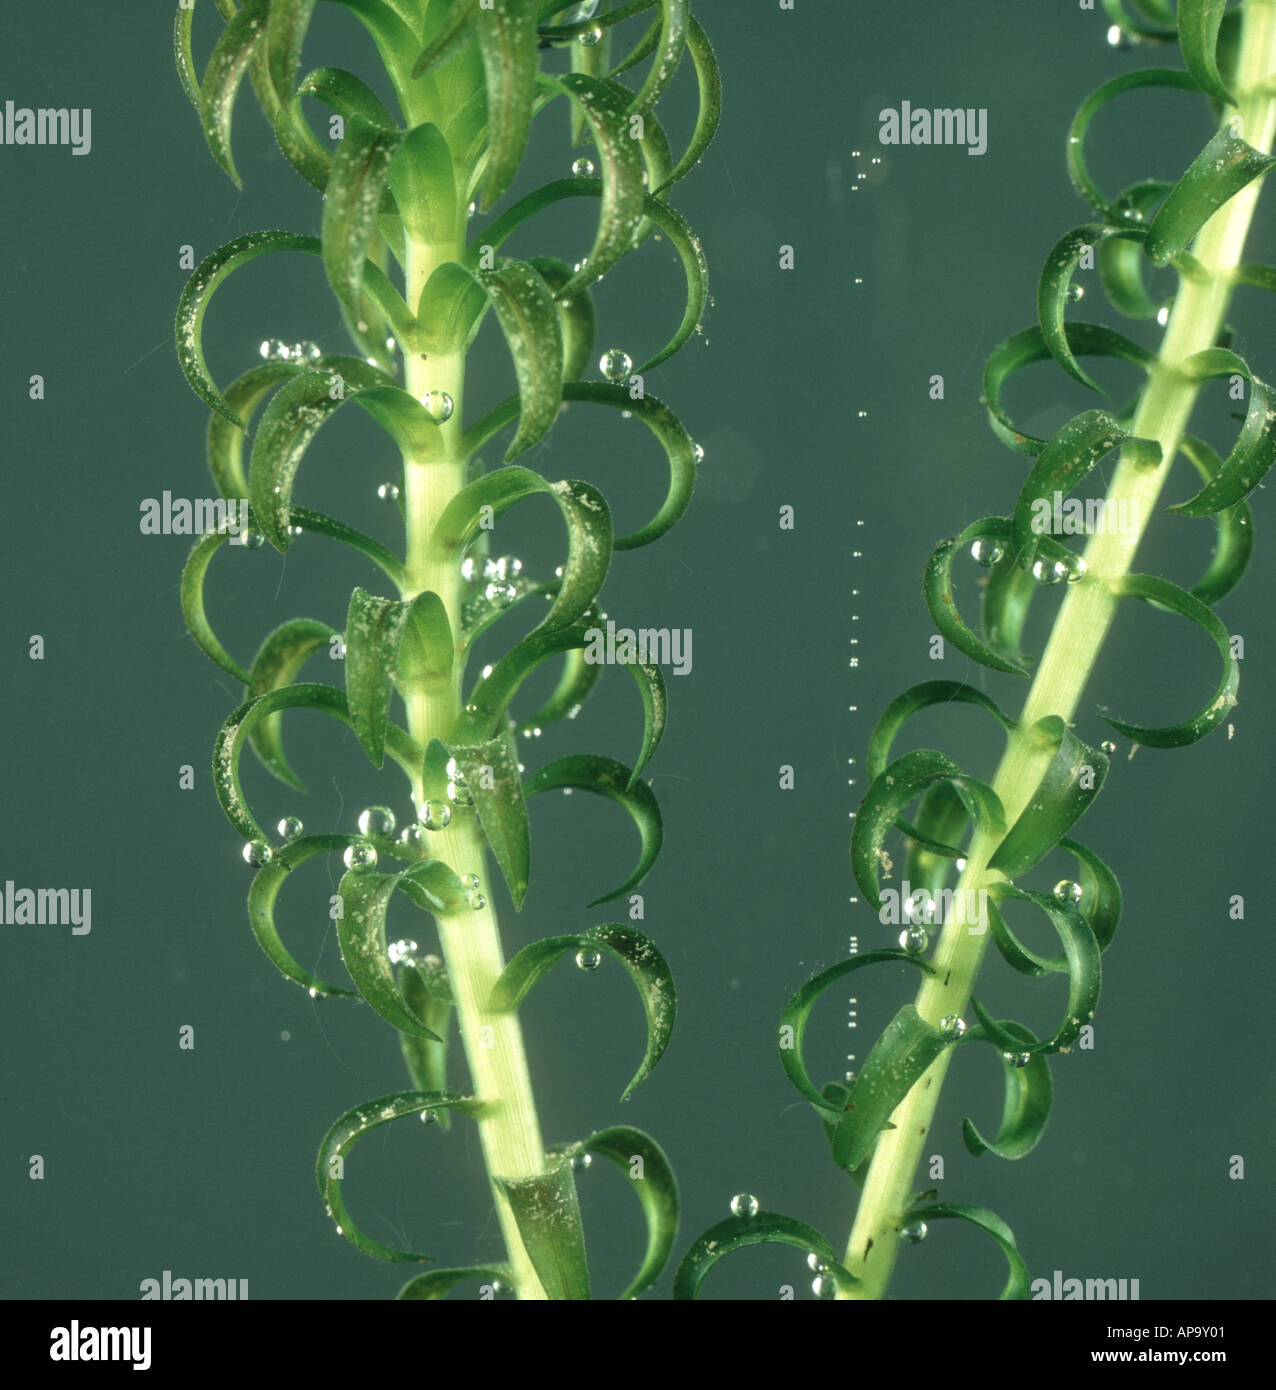 Pondweed Elodea sp giving off oxygen bubbles in light by photosynthesis Stock Photo